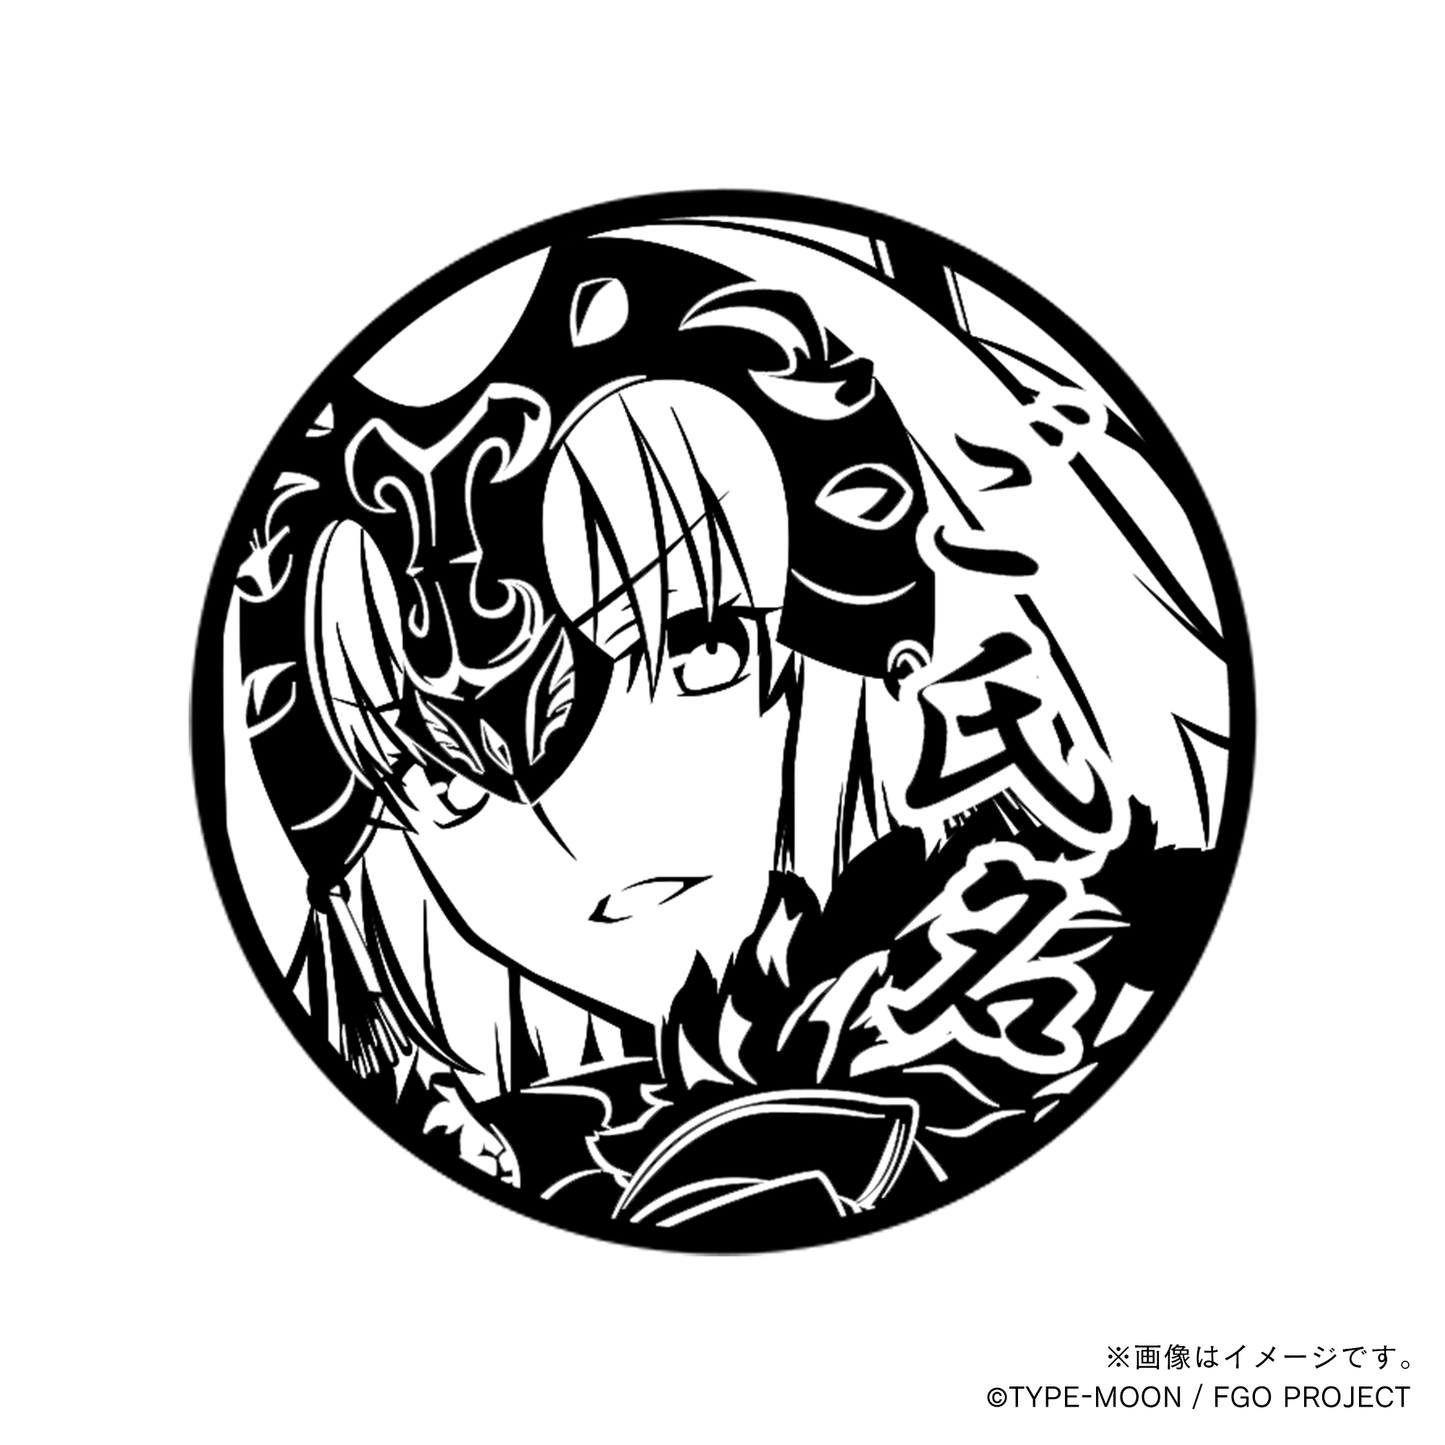 【Fate Grand Order】ジャンヌ・ダルク〔オルタ〕・丸印18mm_ave